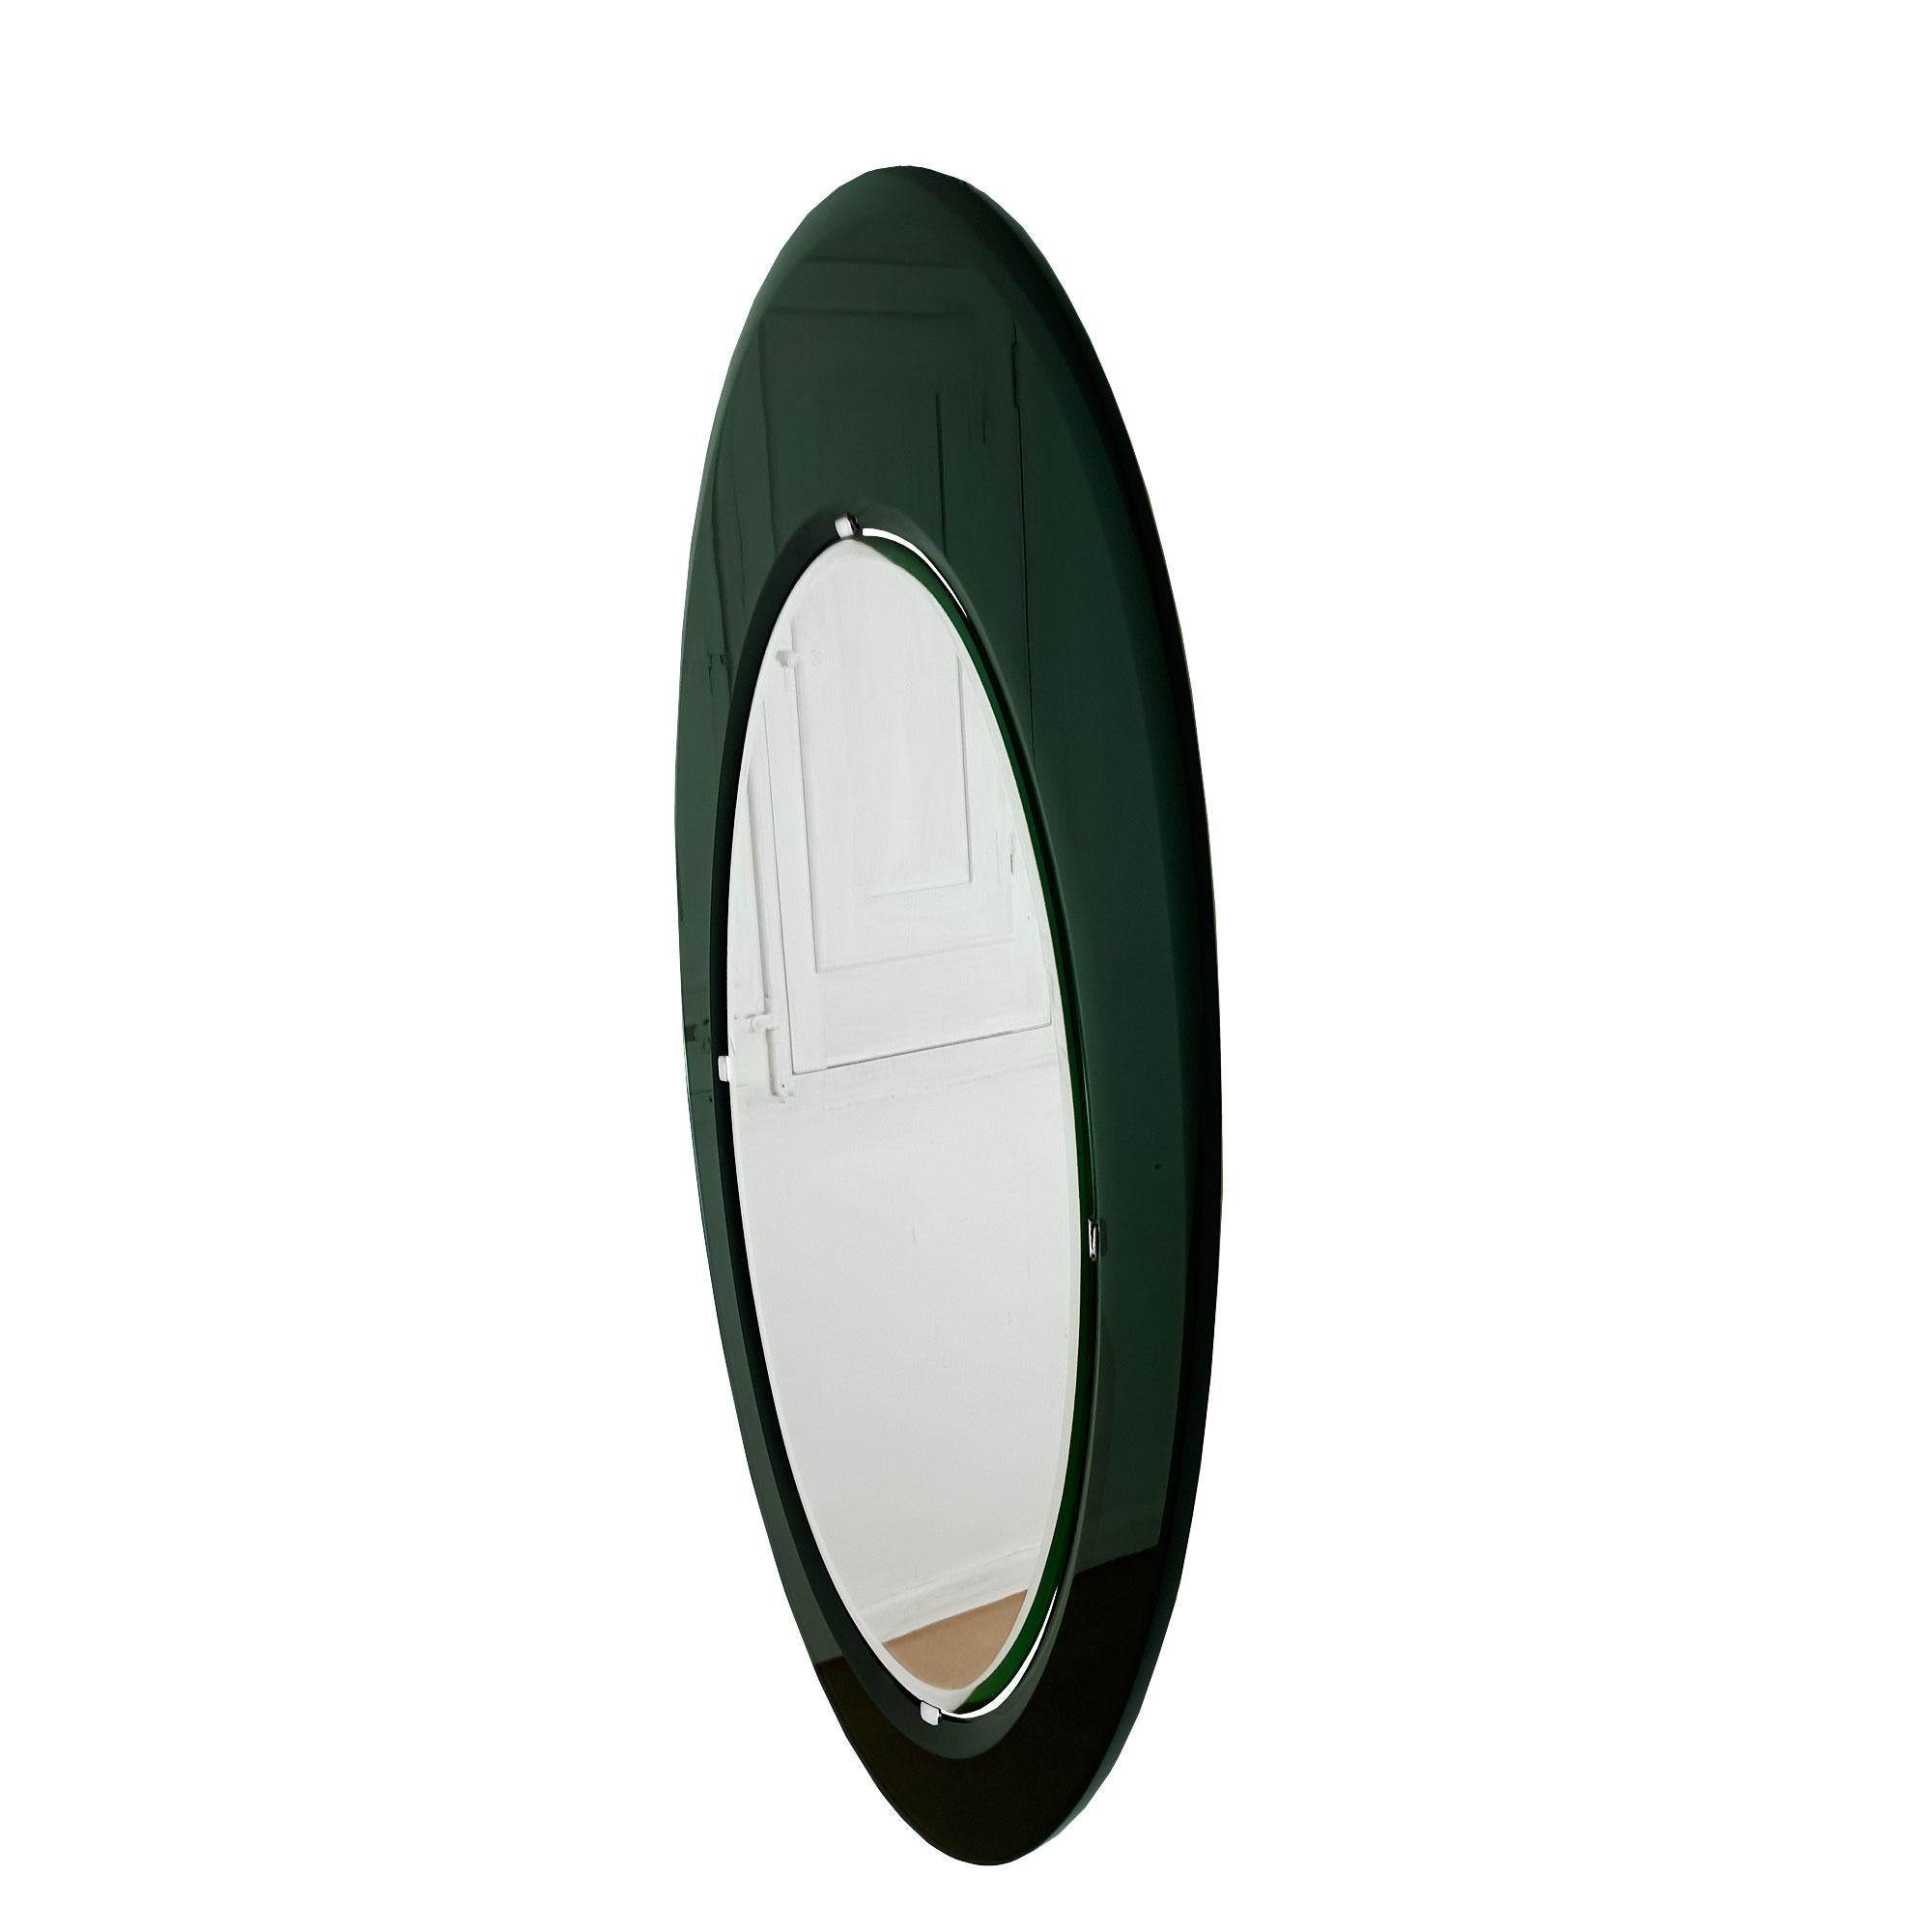 Spectacular large oval mirror. Bevelled mirror mounted in an asymmetrical dark green mirror frame bevelled on the inside and outside (elaborate, removable fixing system). Very high quality craftmanship.
Attributed to Fontana Arte.

Italy 1960